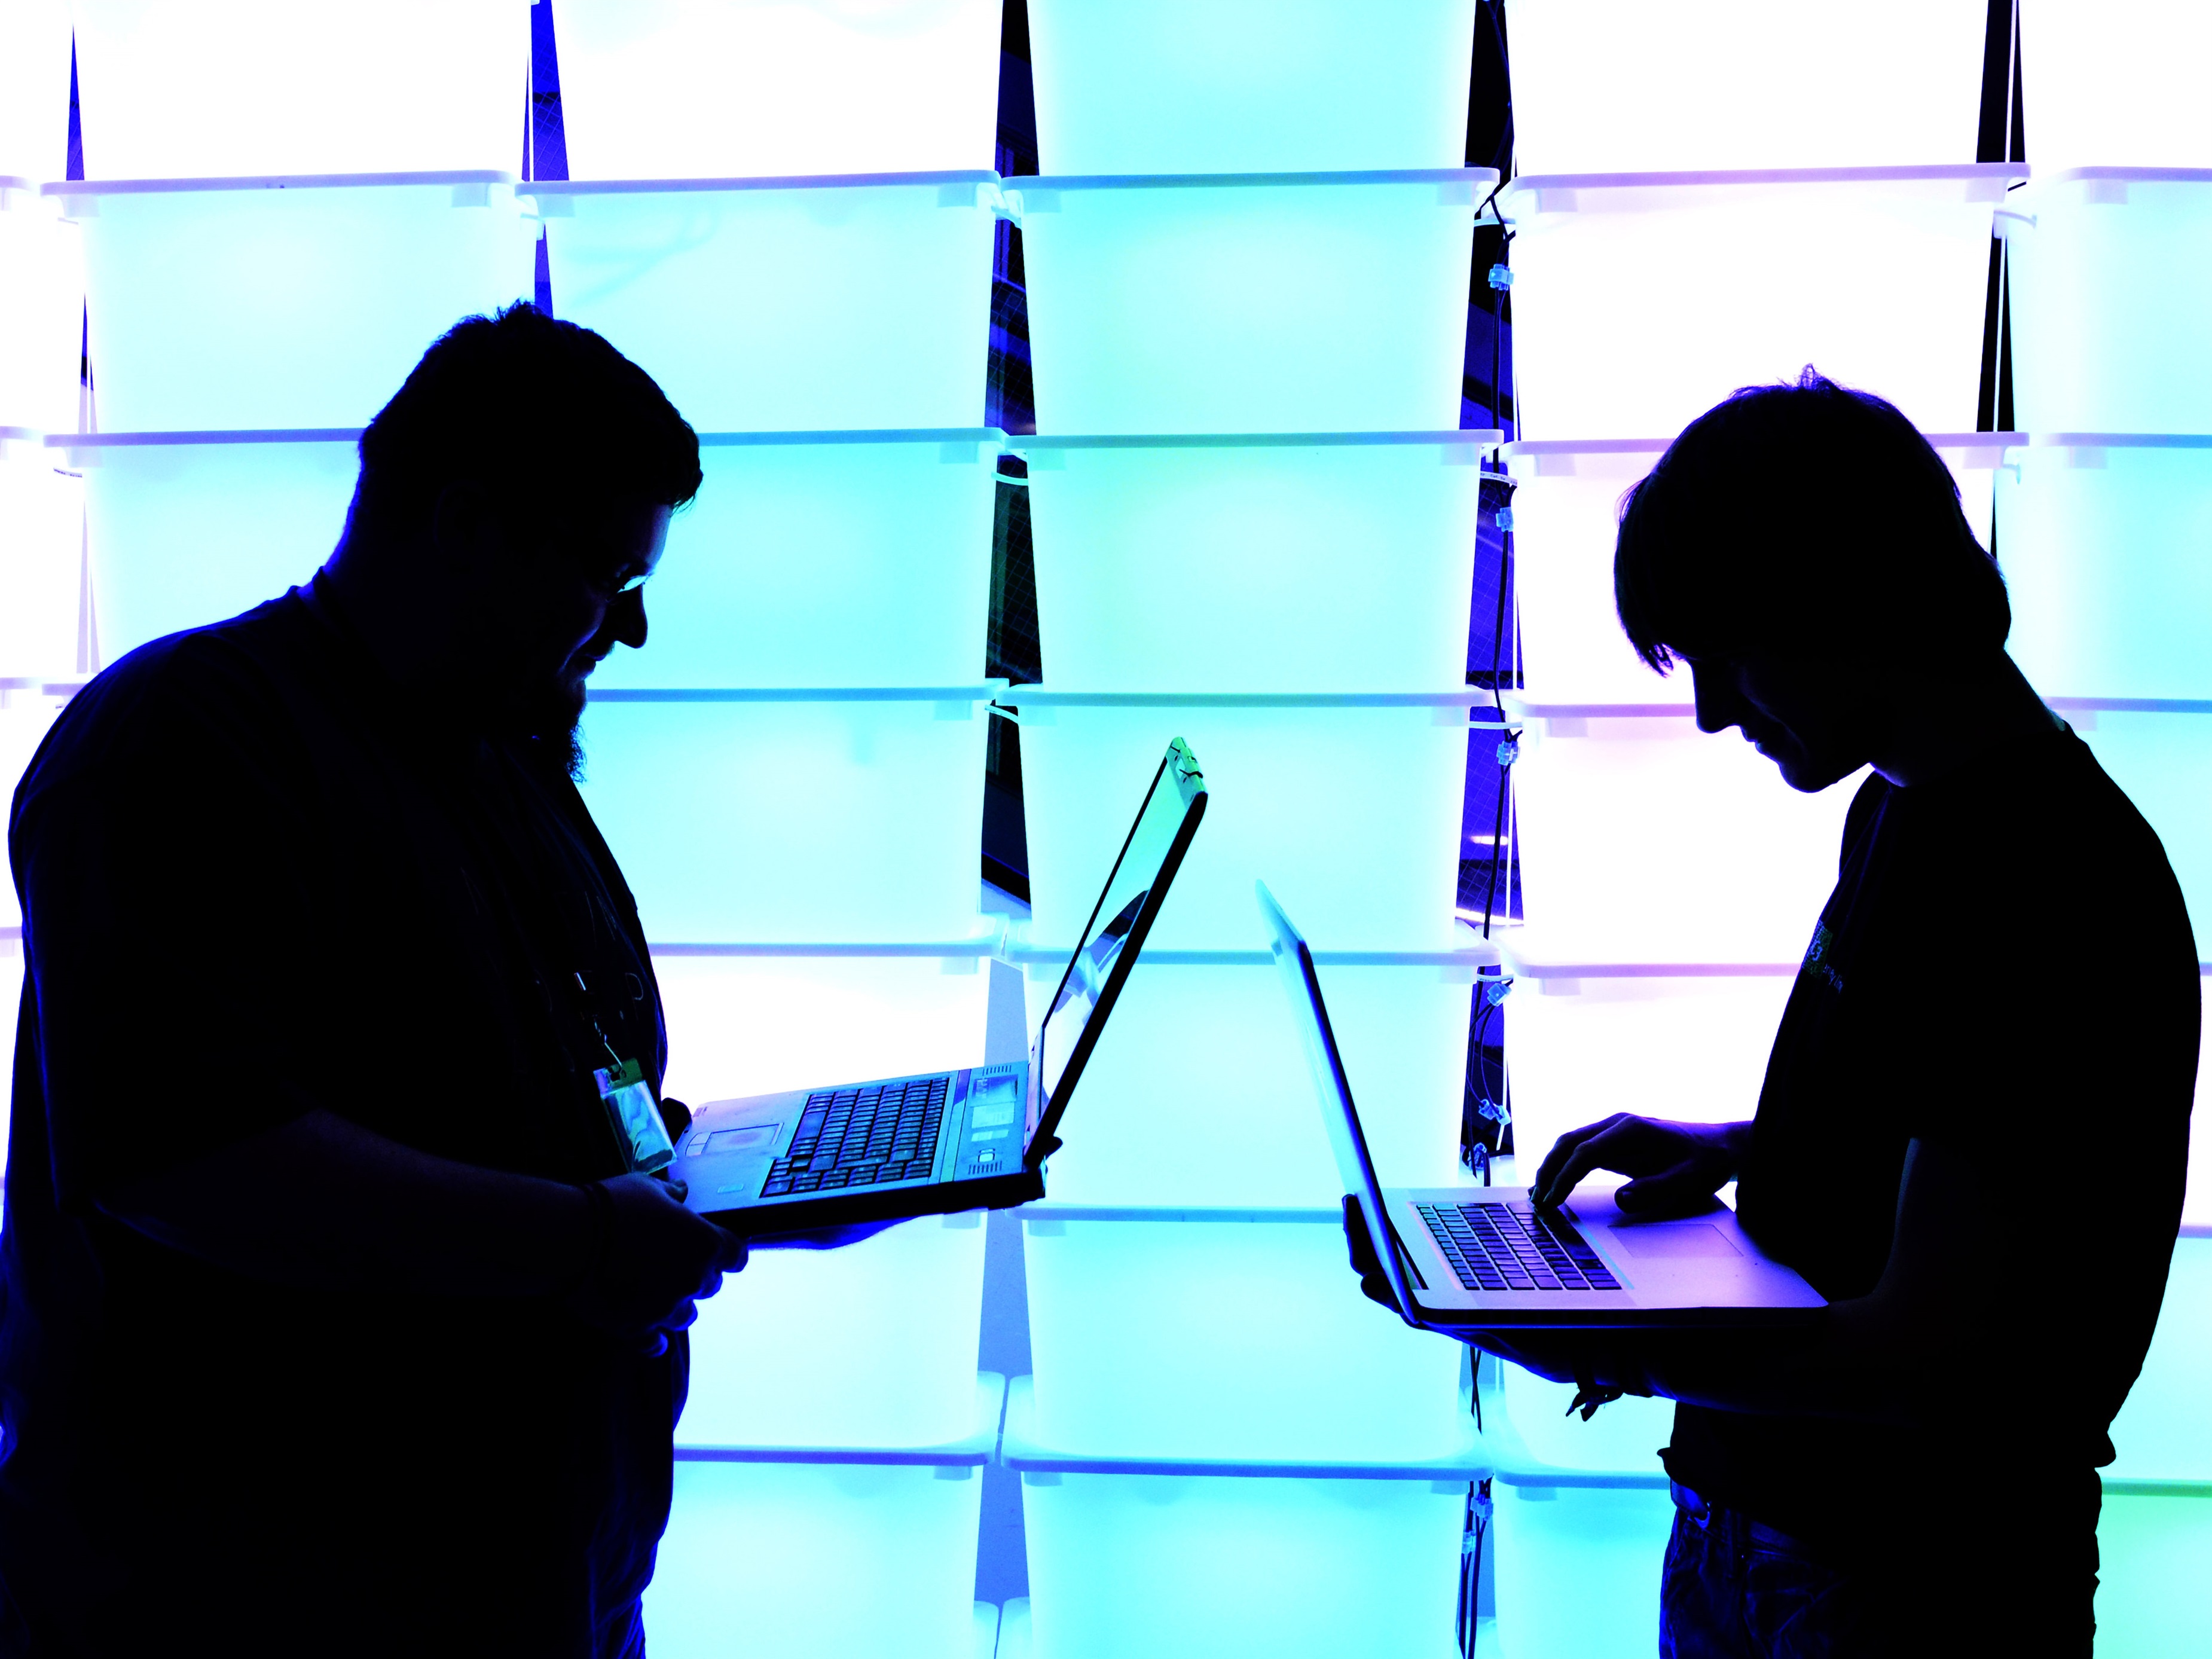 Participant hold their laptops in front of an illuminated wall at the annual Chaos Computer Club (CCC) computer hackers' congress, called 29C3, on December 28, 2012 in Hamburg, Germany.